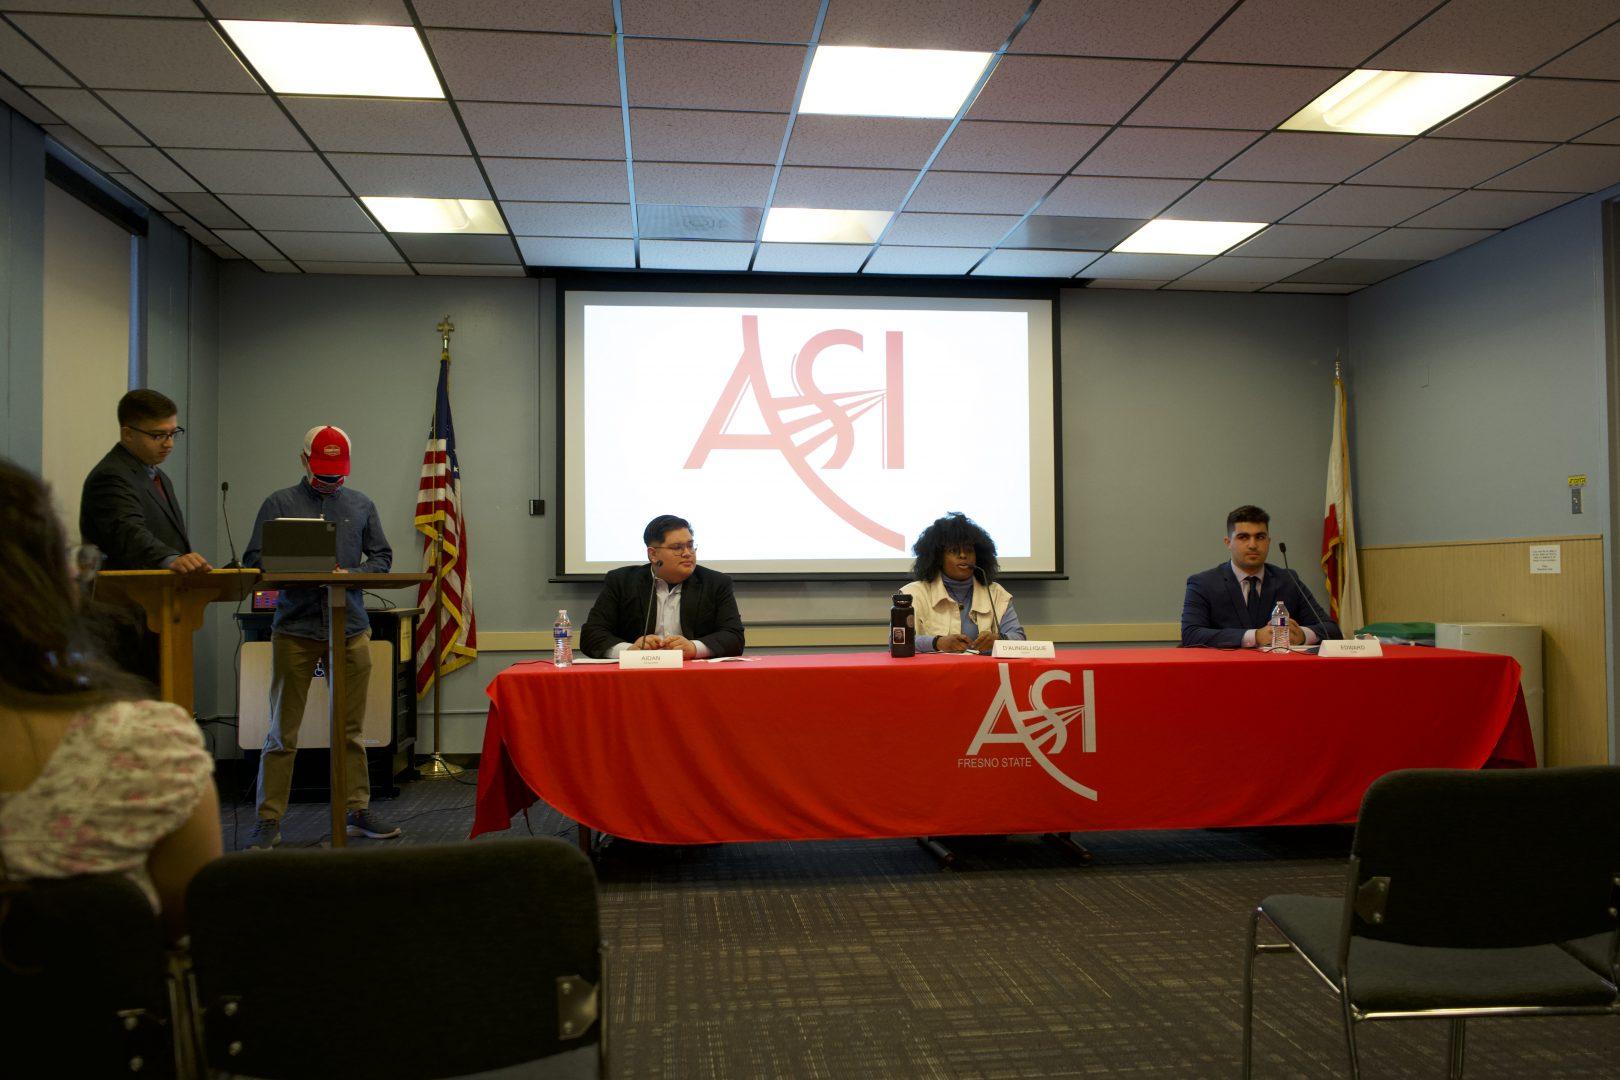 Candidates gathered in the 2022 ASI presidential debate on March 18, 2022. A second ASI presidential debate for the special election is on April 26 in the University Student Union at 11 a.m.(Wyatt Bible/ The Collegian)